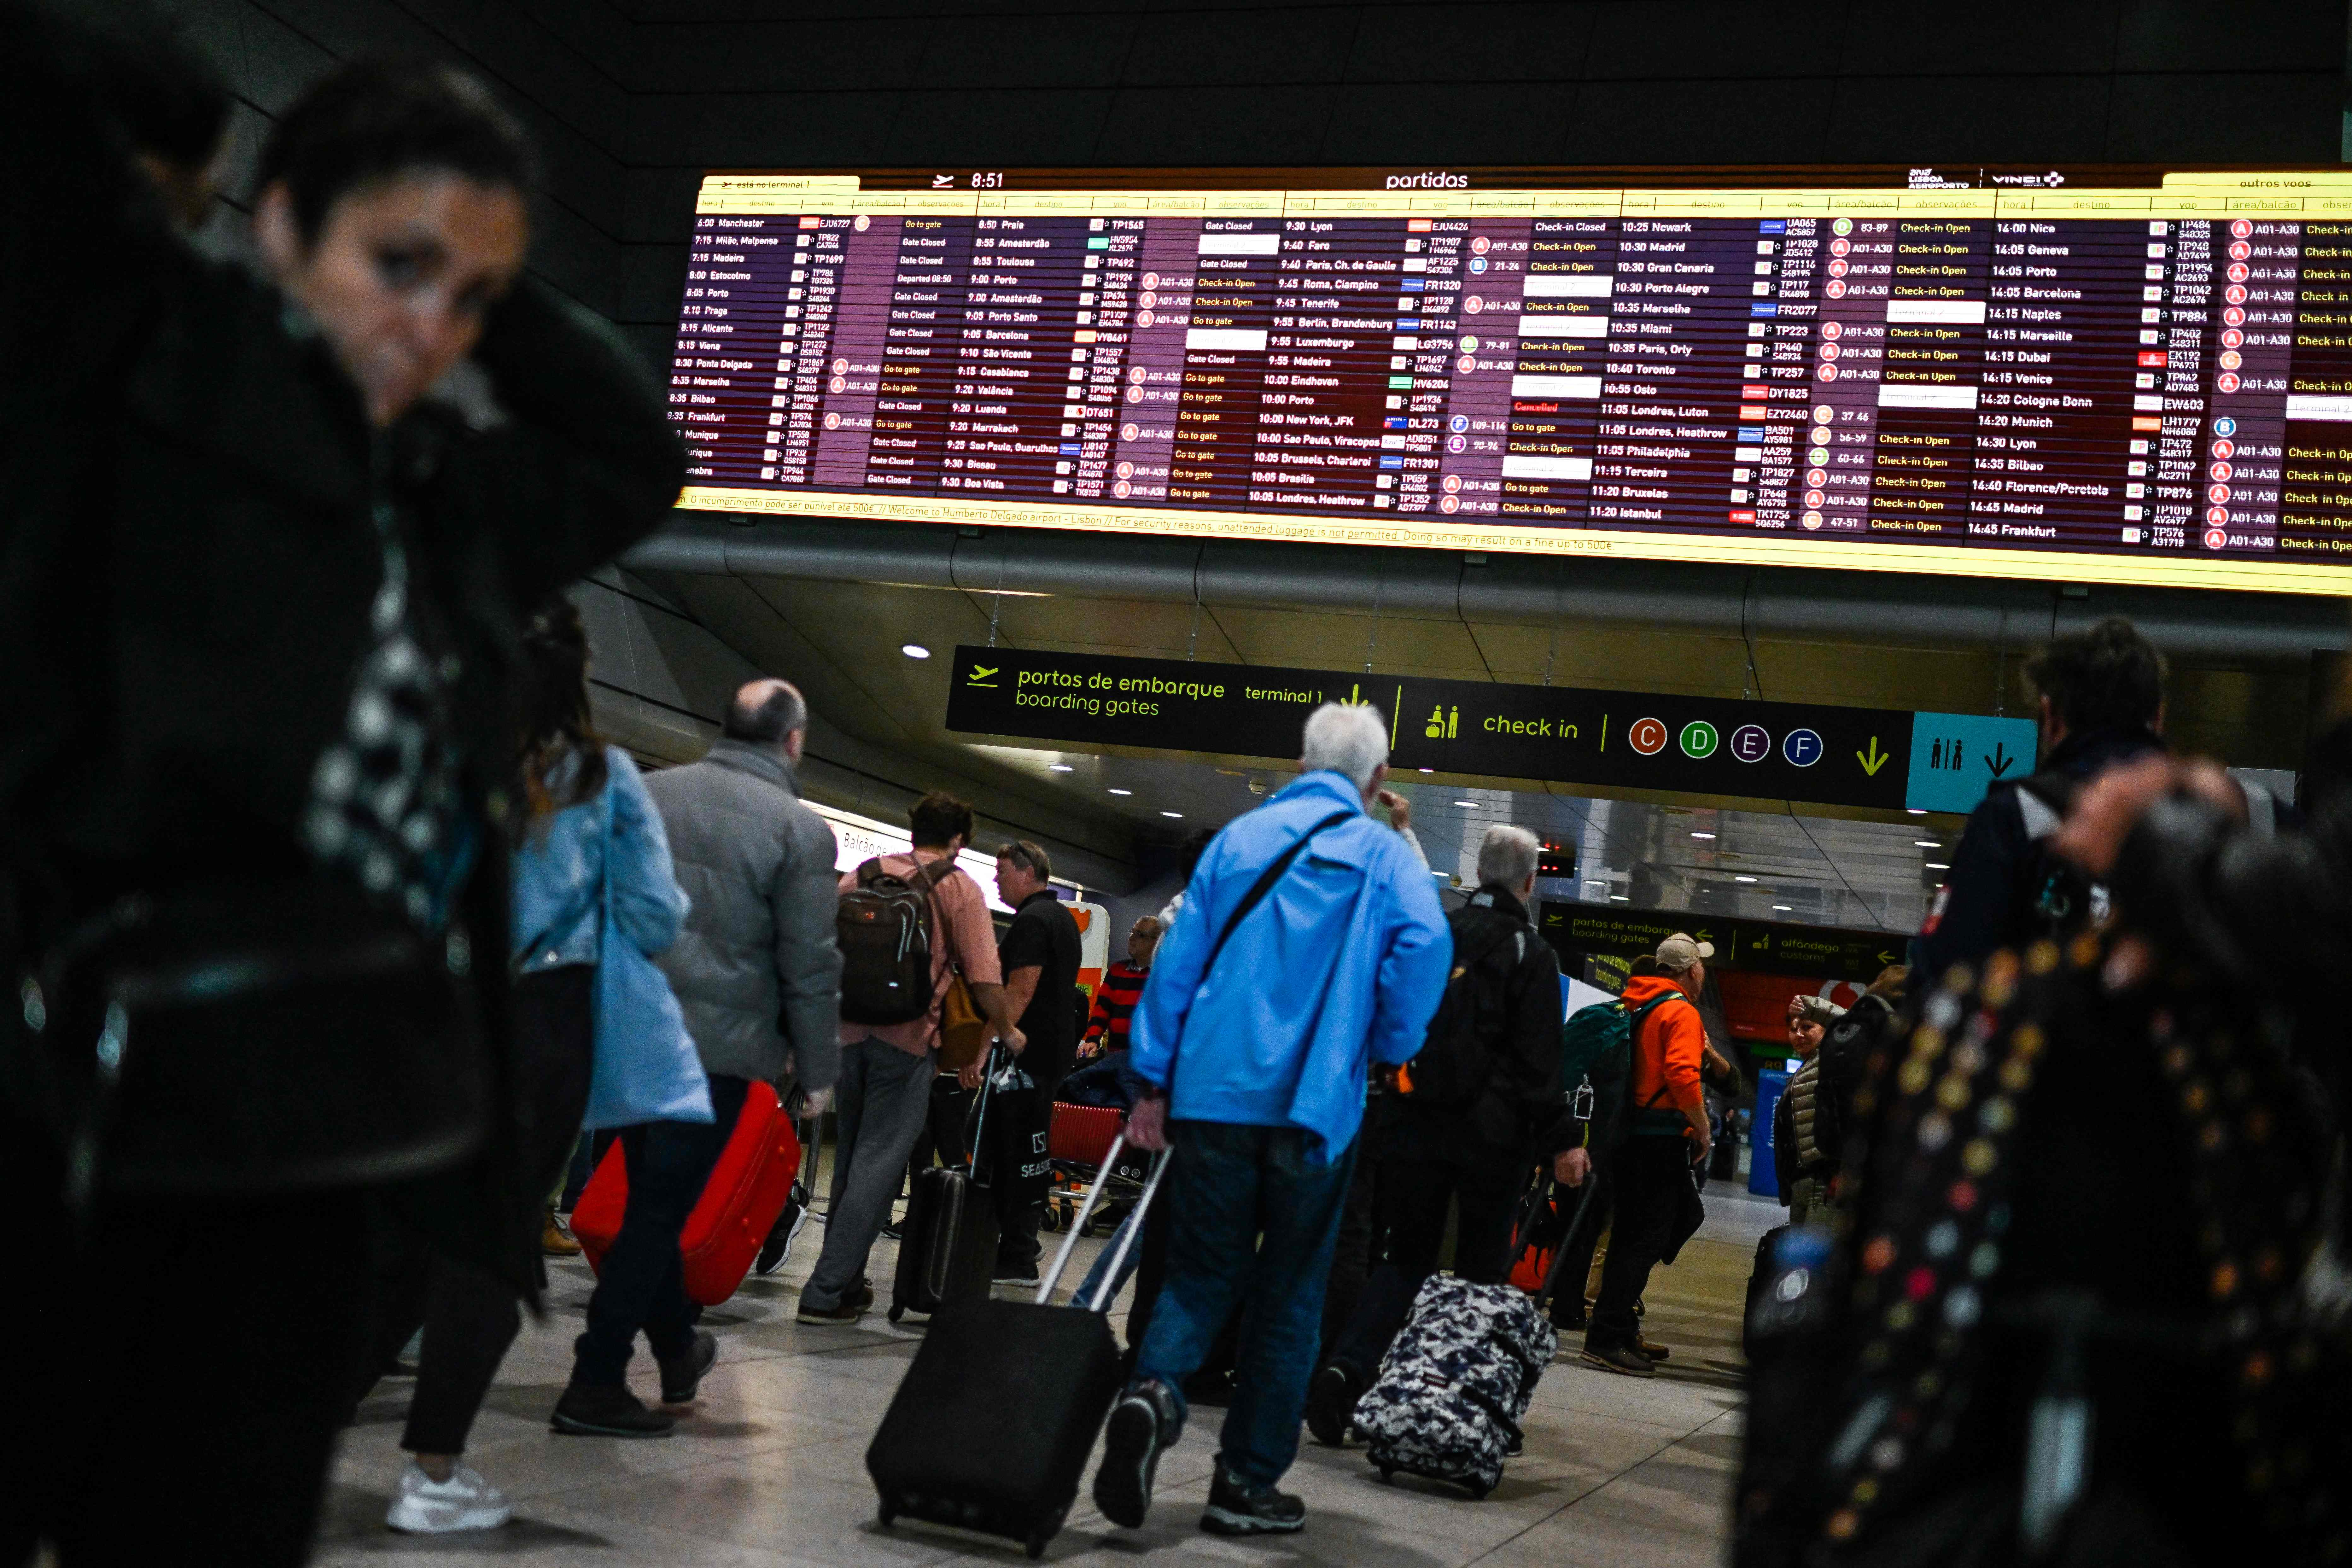 Passengers look at the departures board at Humberto Delgado airport in Lisbon on April 1, 2023